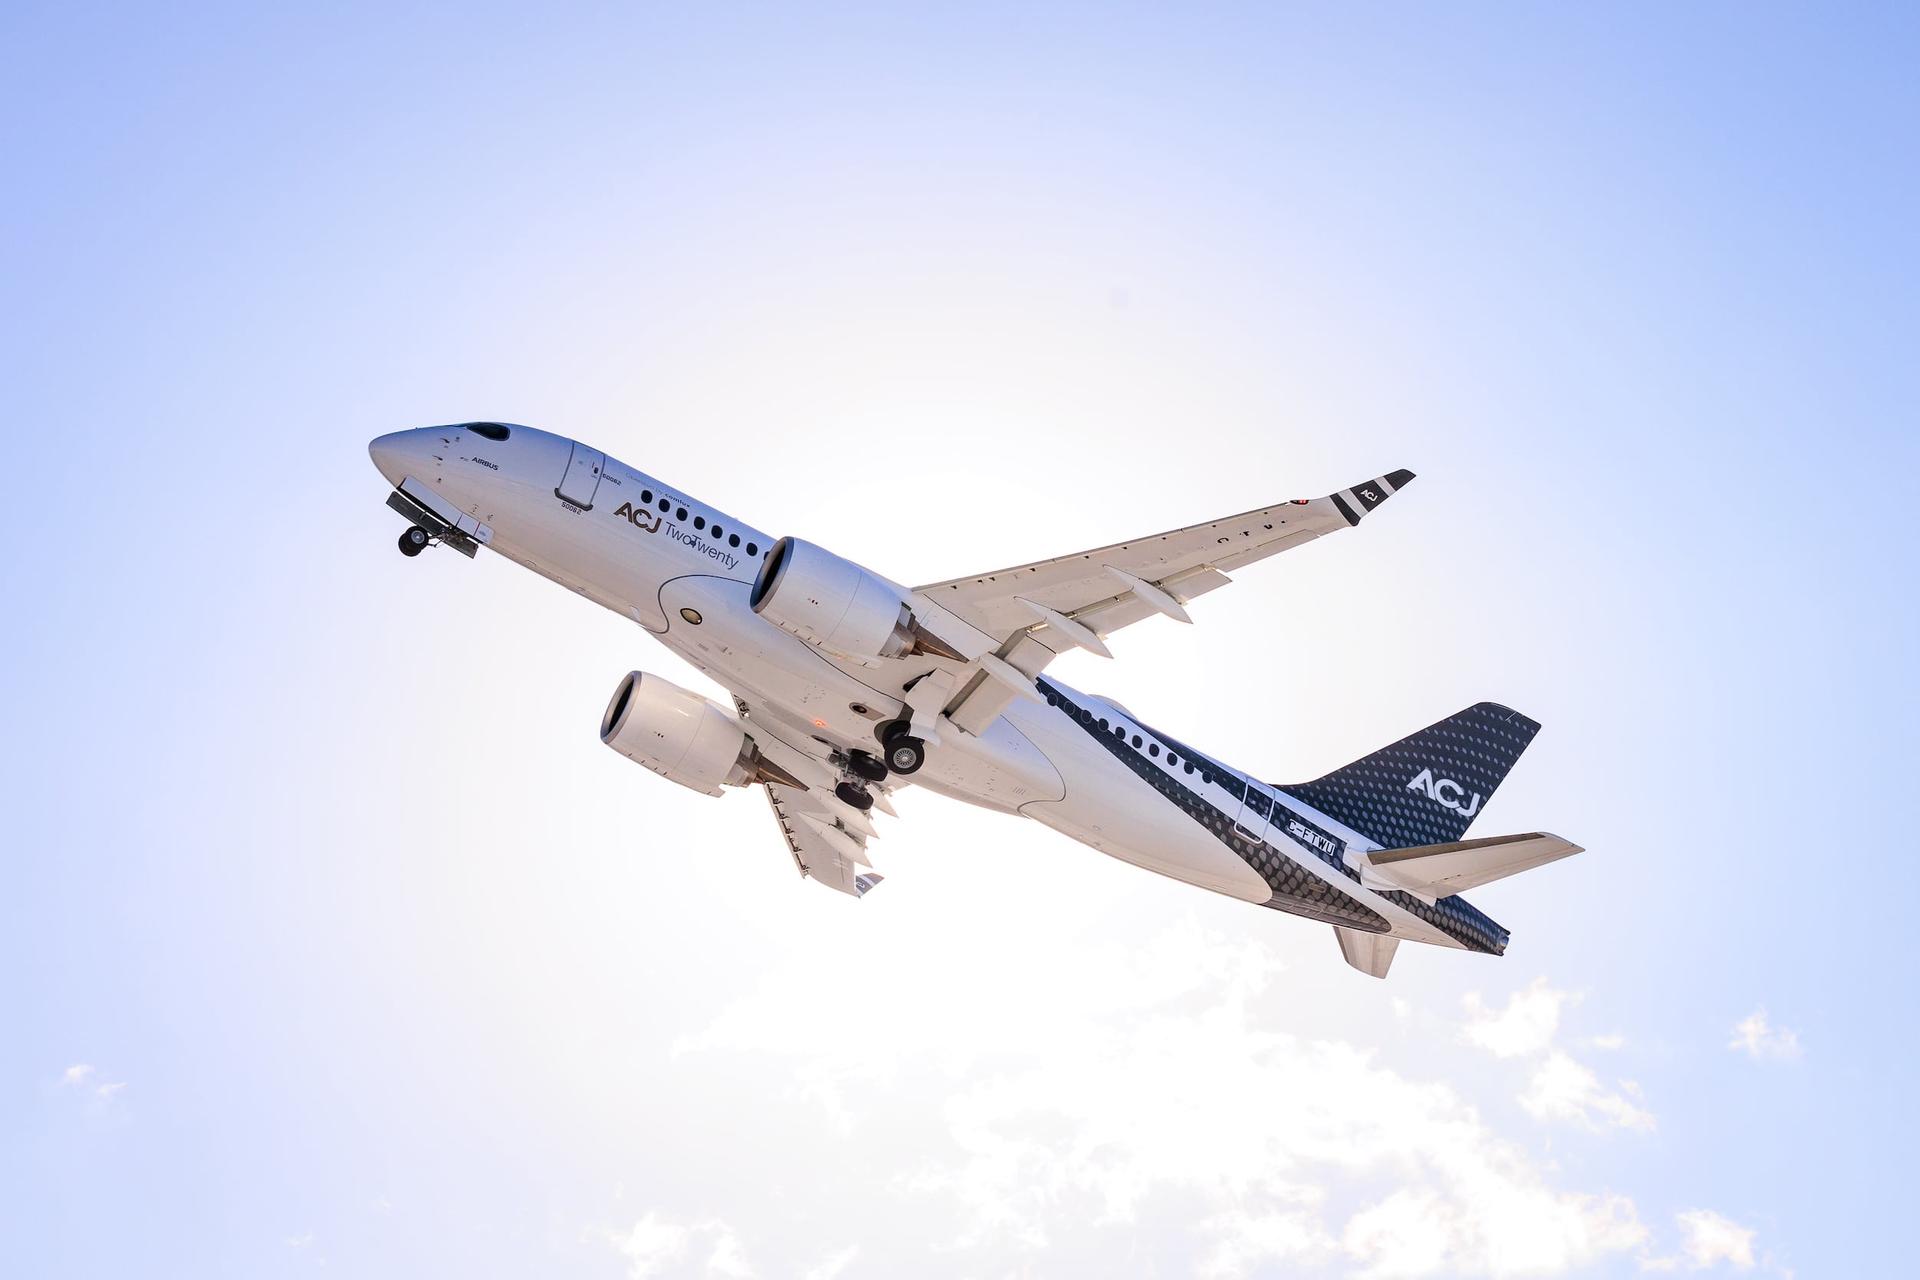 An ACJ TwoTwenty taking off on its delivery flight to its buyer, Comlux.